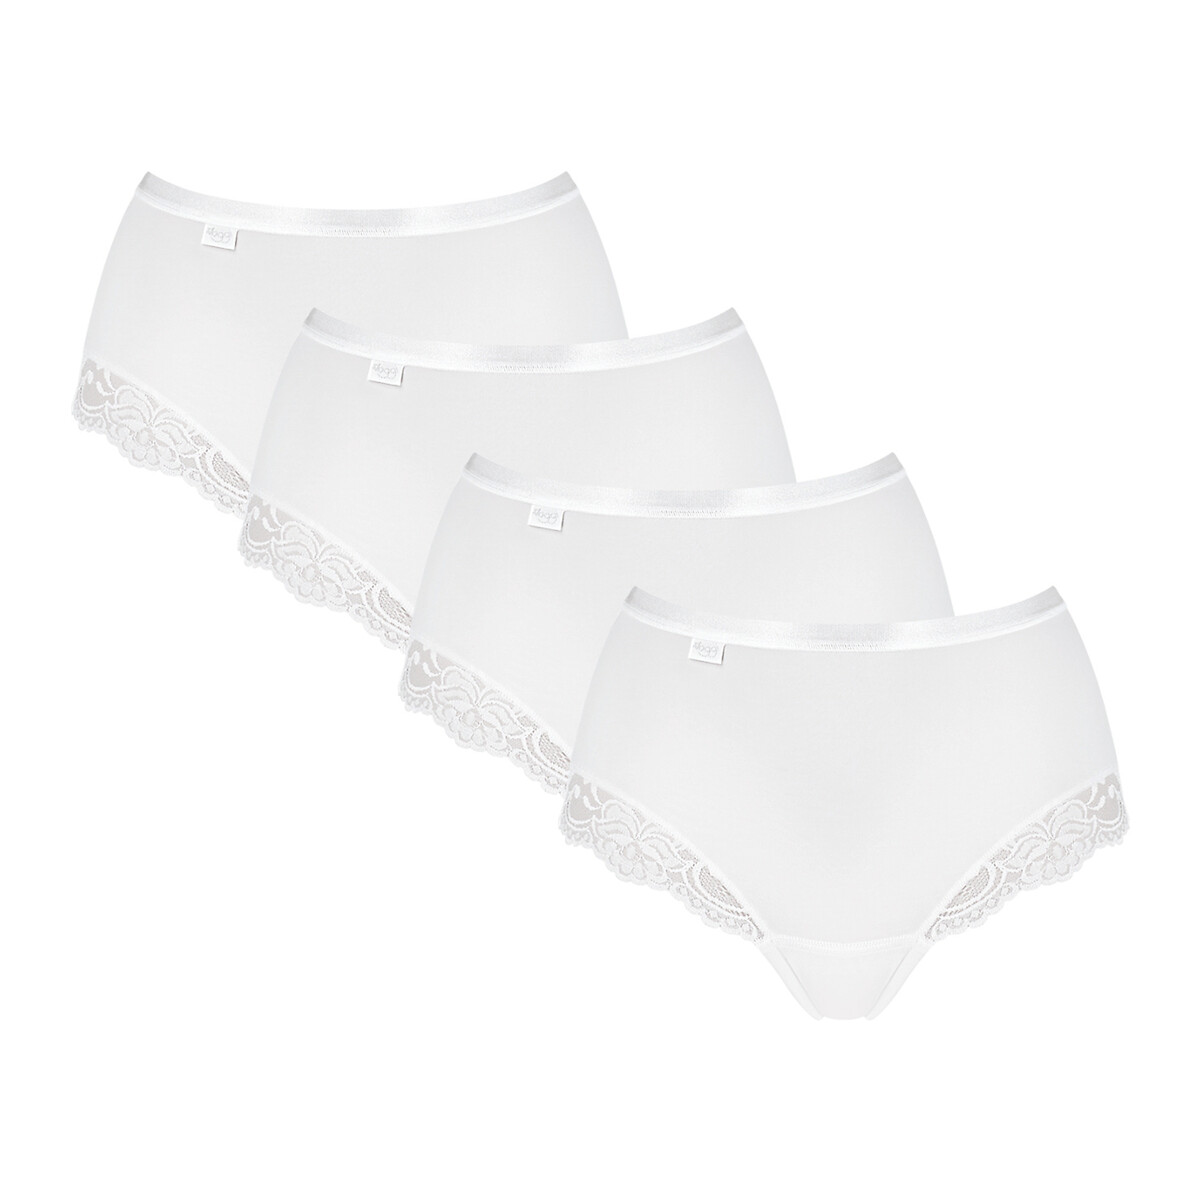 3 Pack Ladies White Maxi Briefs with Lace Knickers Size 12 14 16